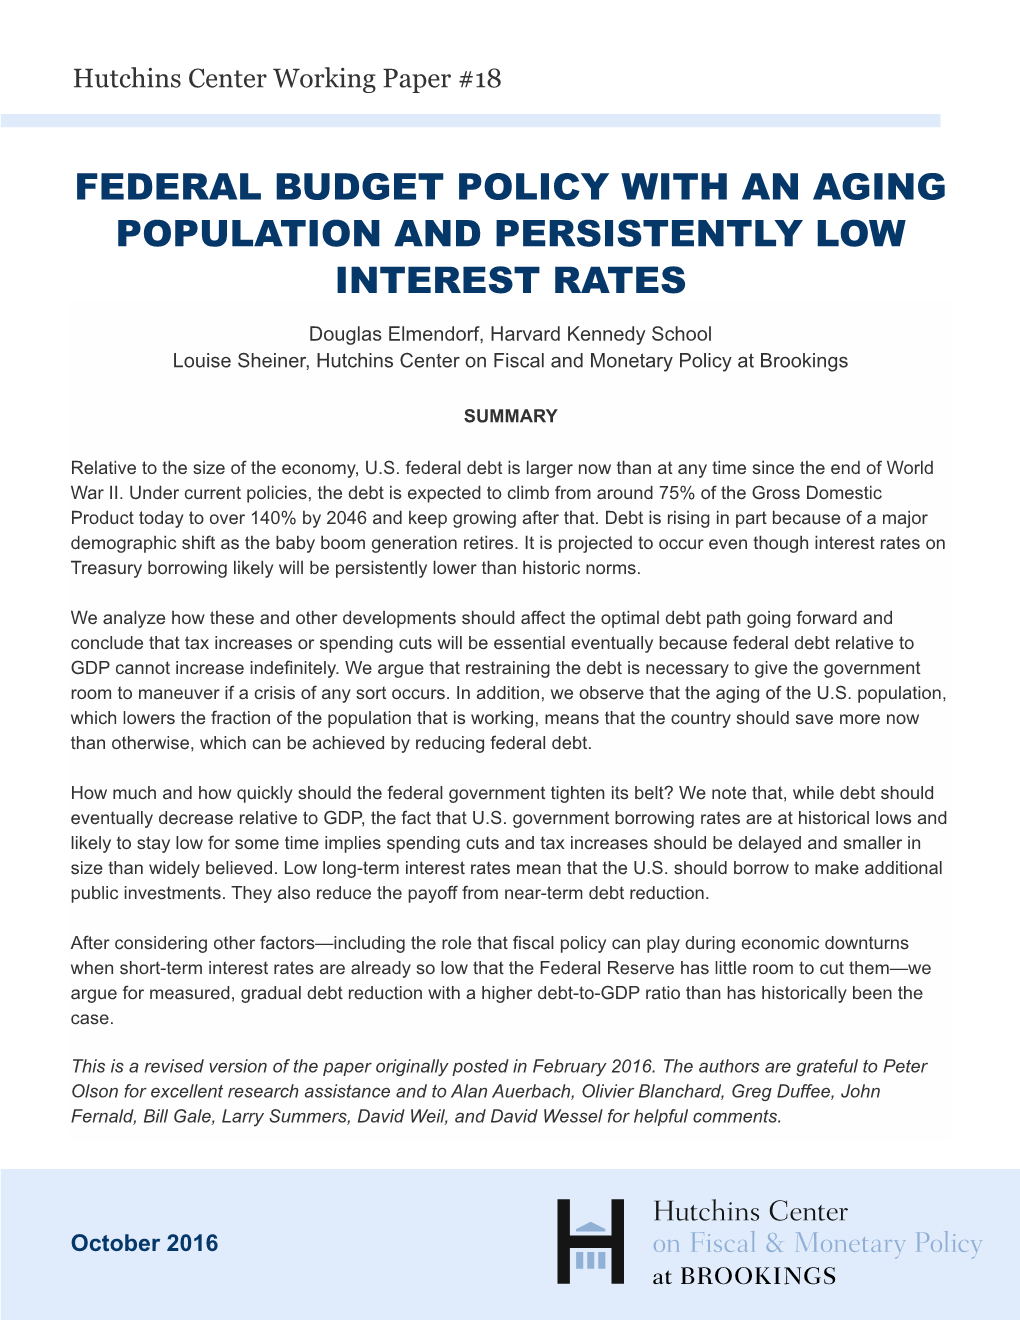 Federal Budget Policy with an Aging Population and Persistently Low Interest Rates